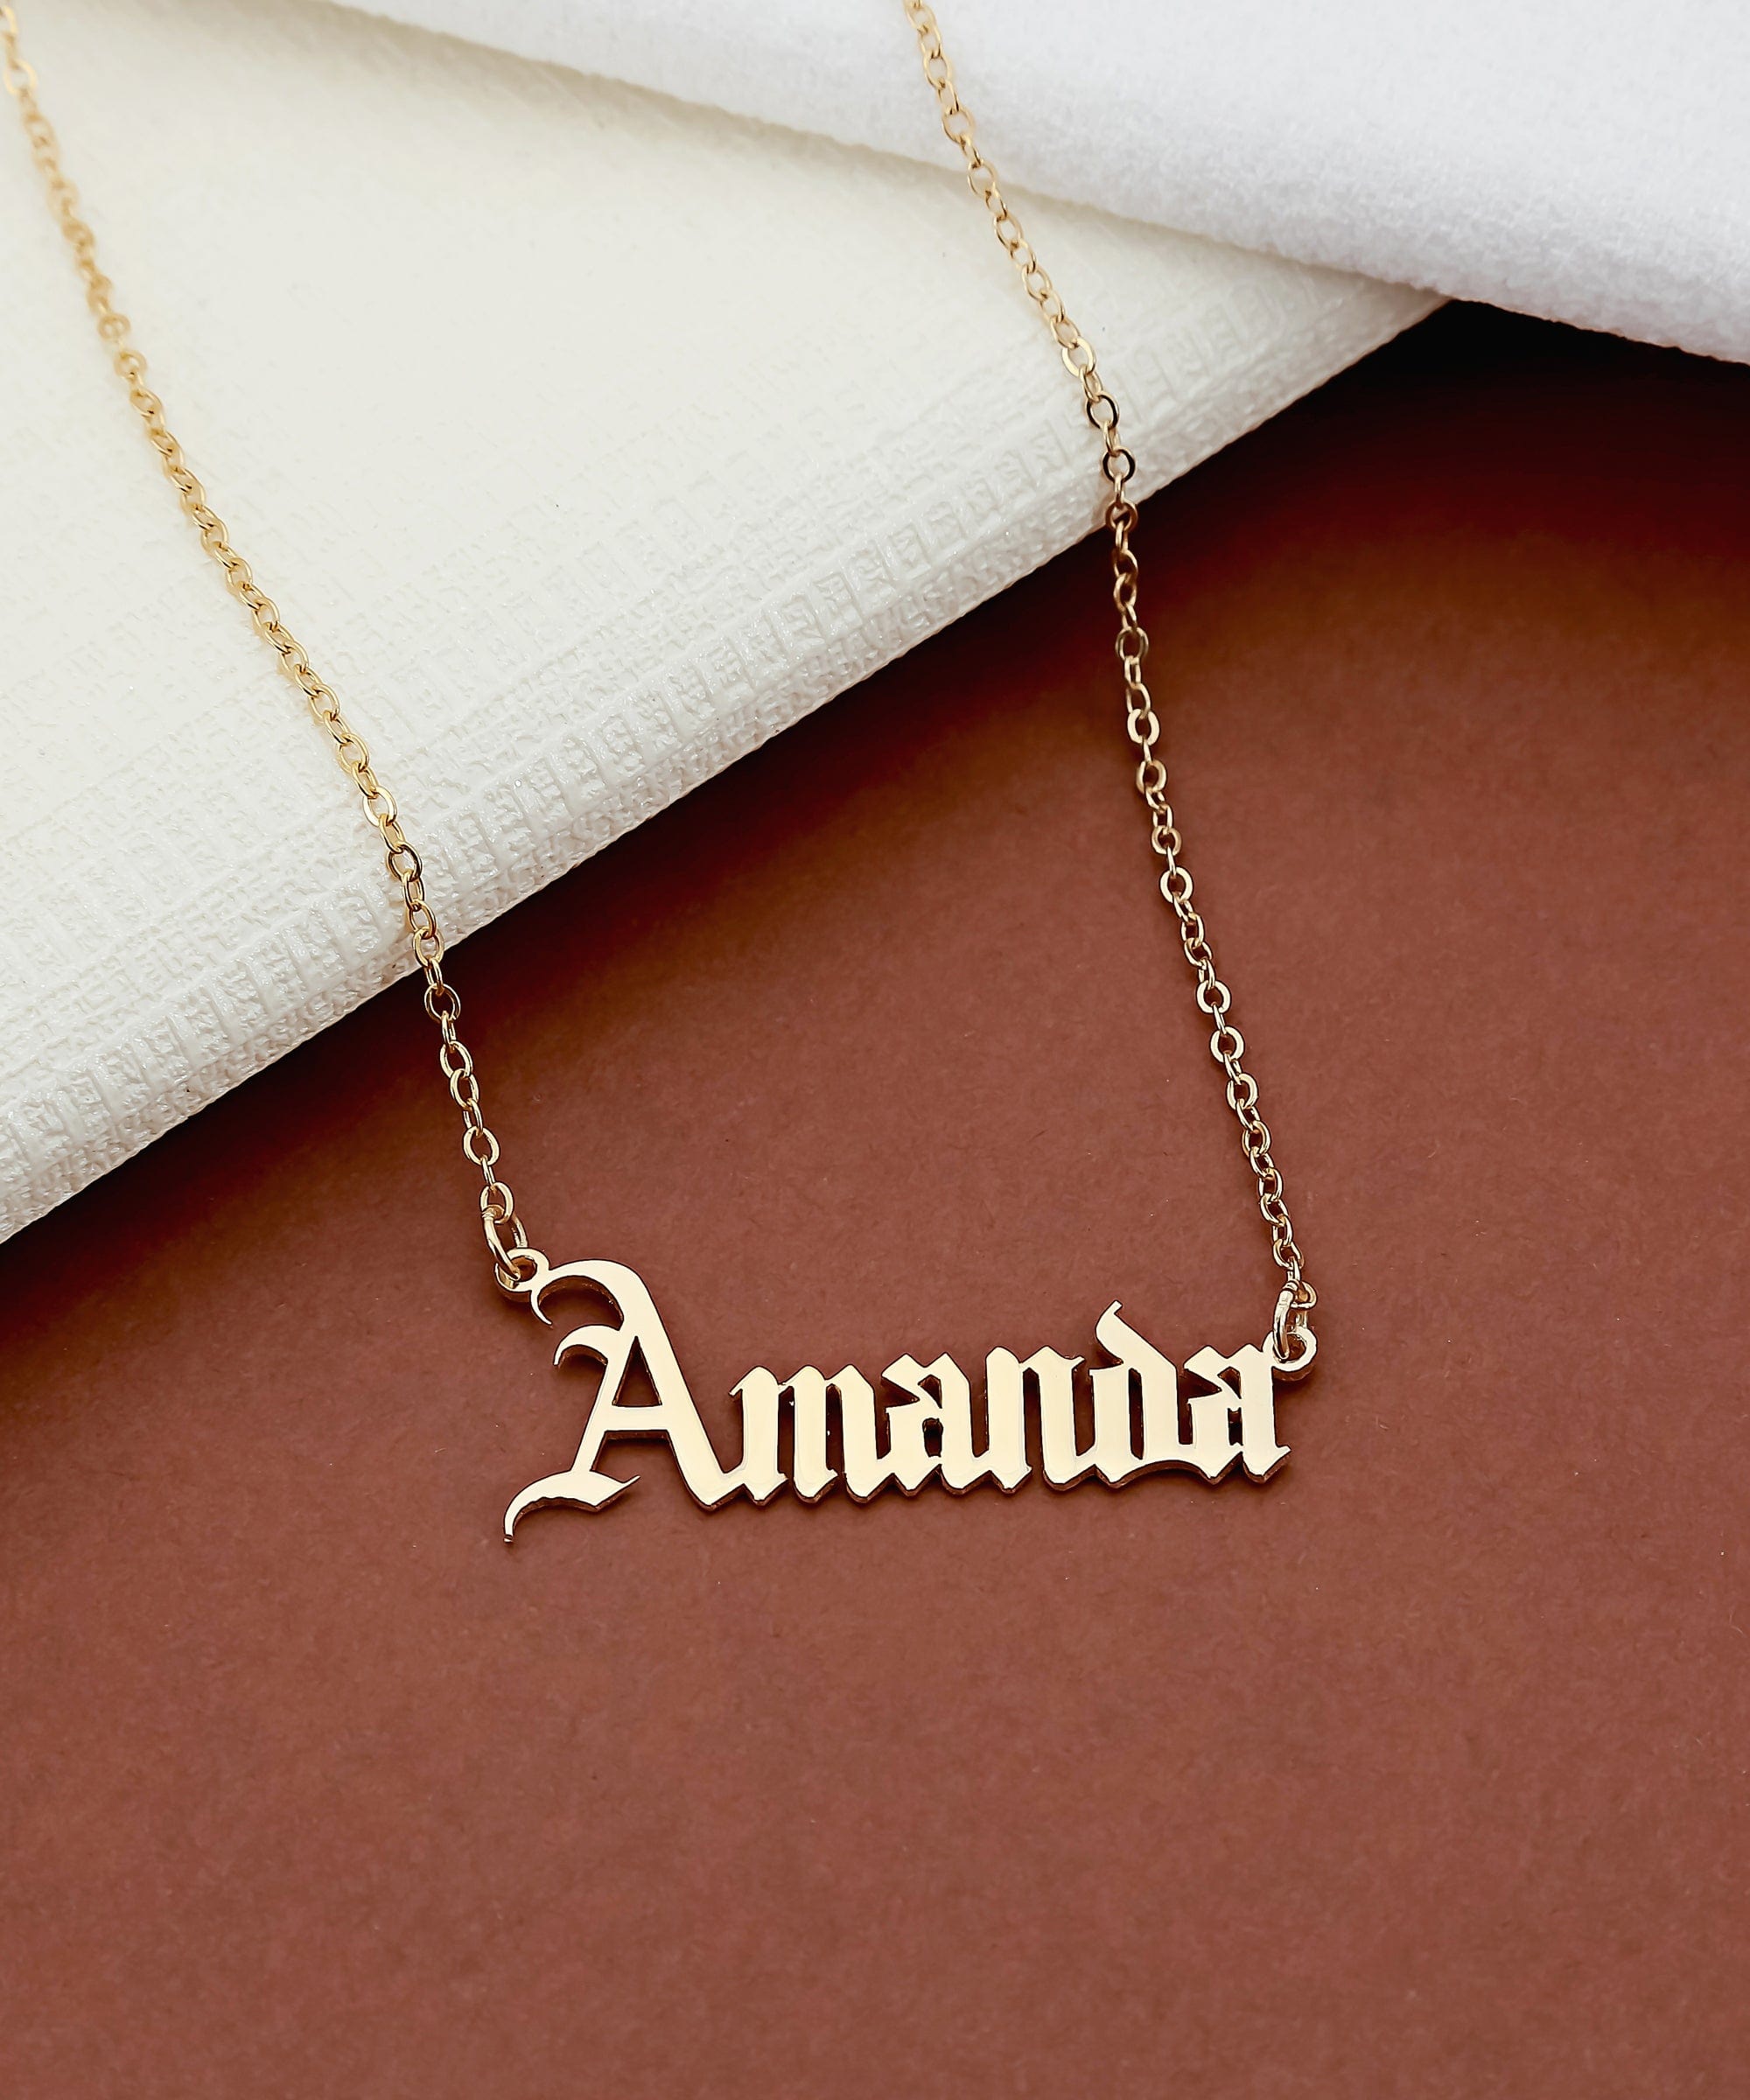 The Gothic Name Necklace